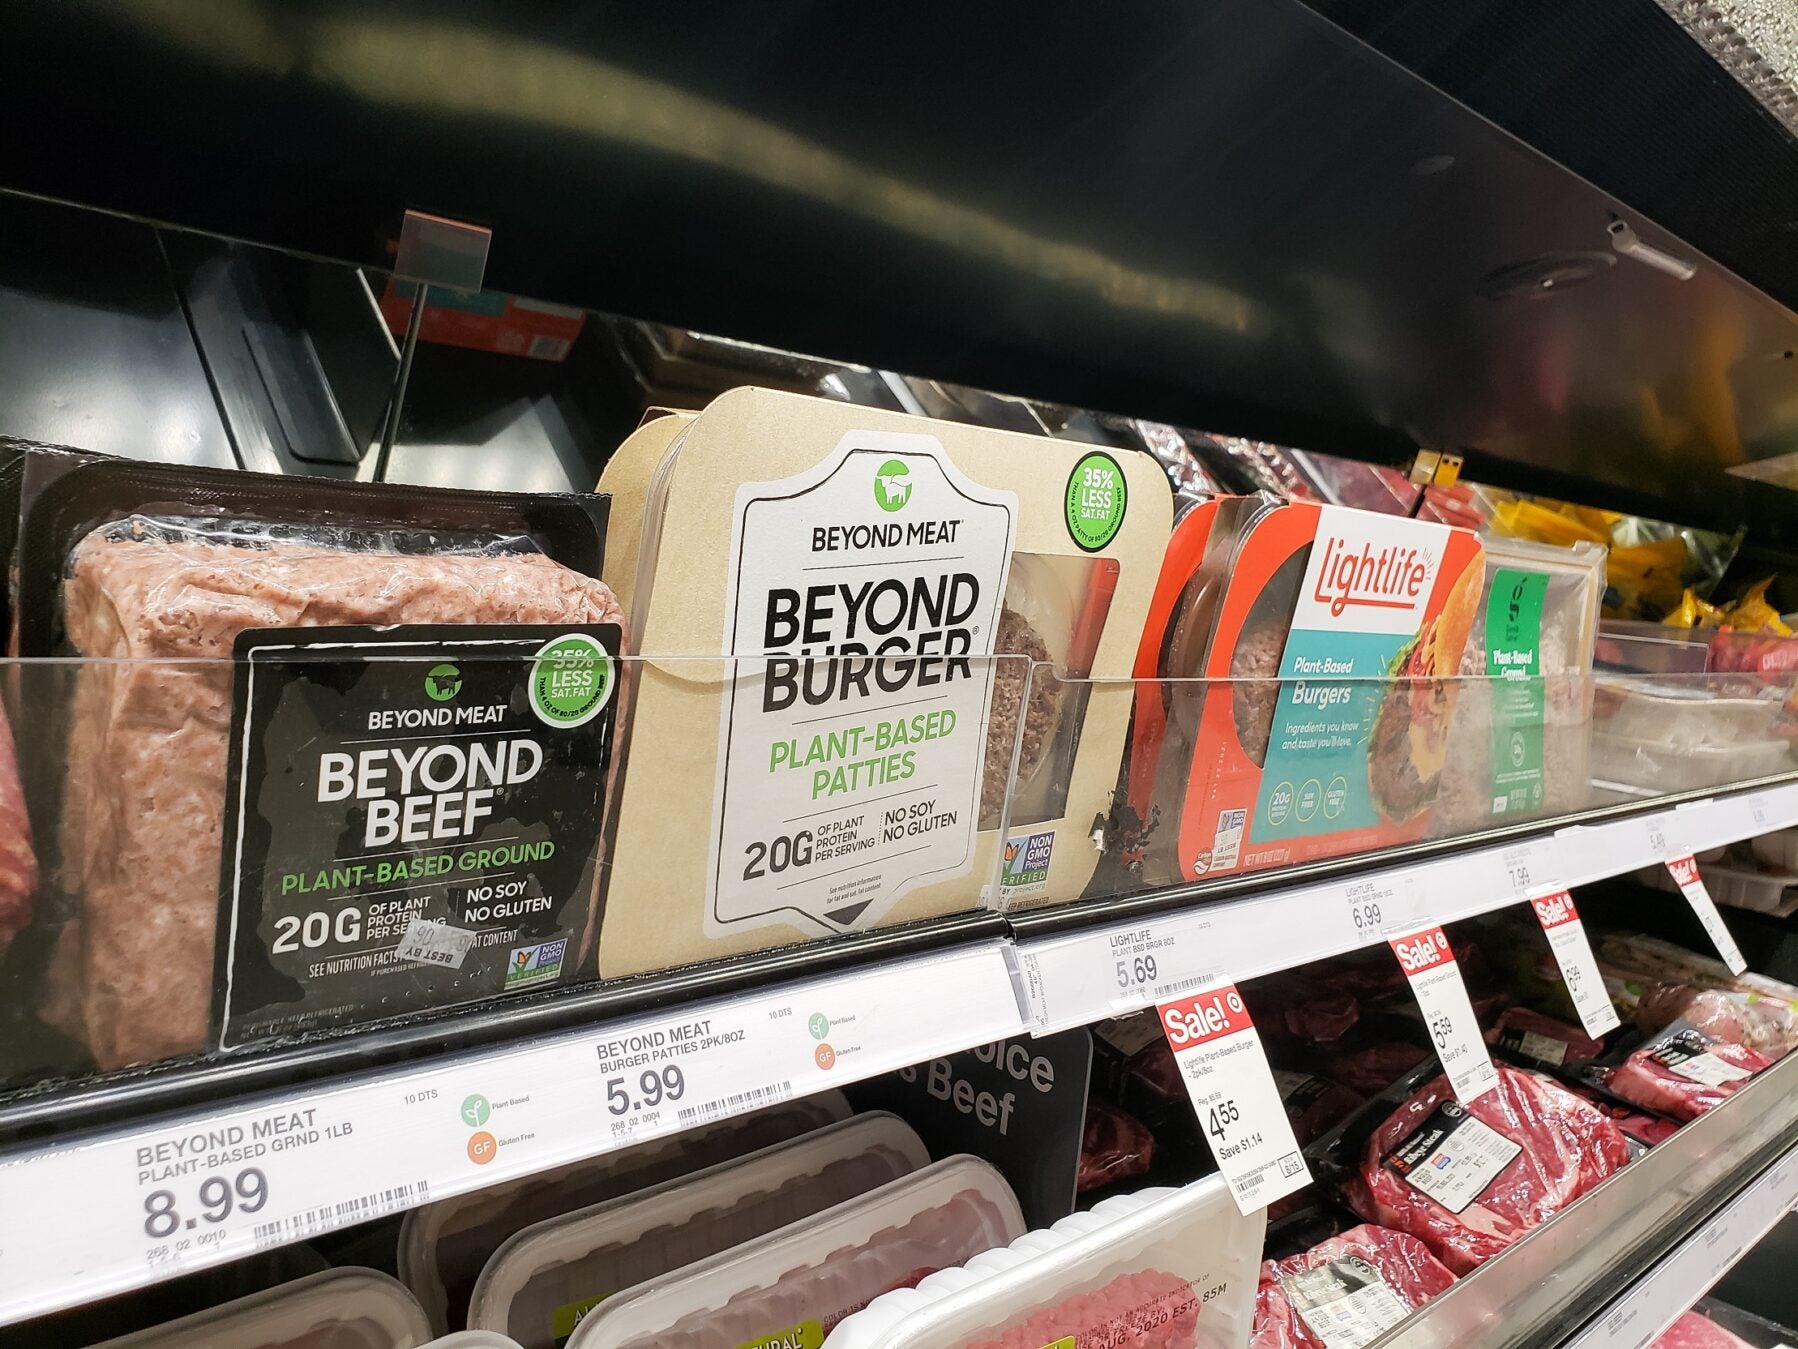 Beyond Meat refutes claims of unsanitary conditions at Pennsylvania plant